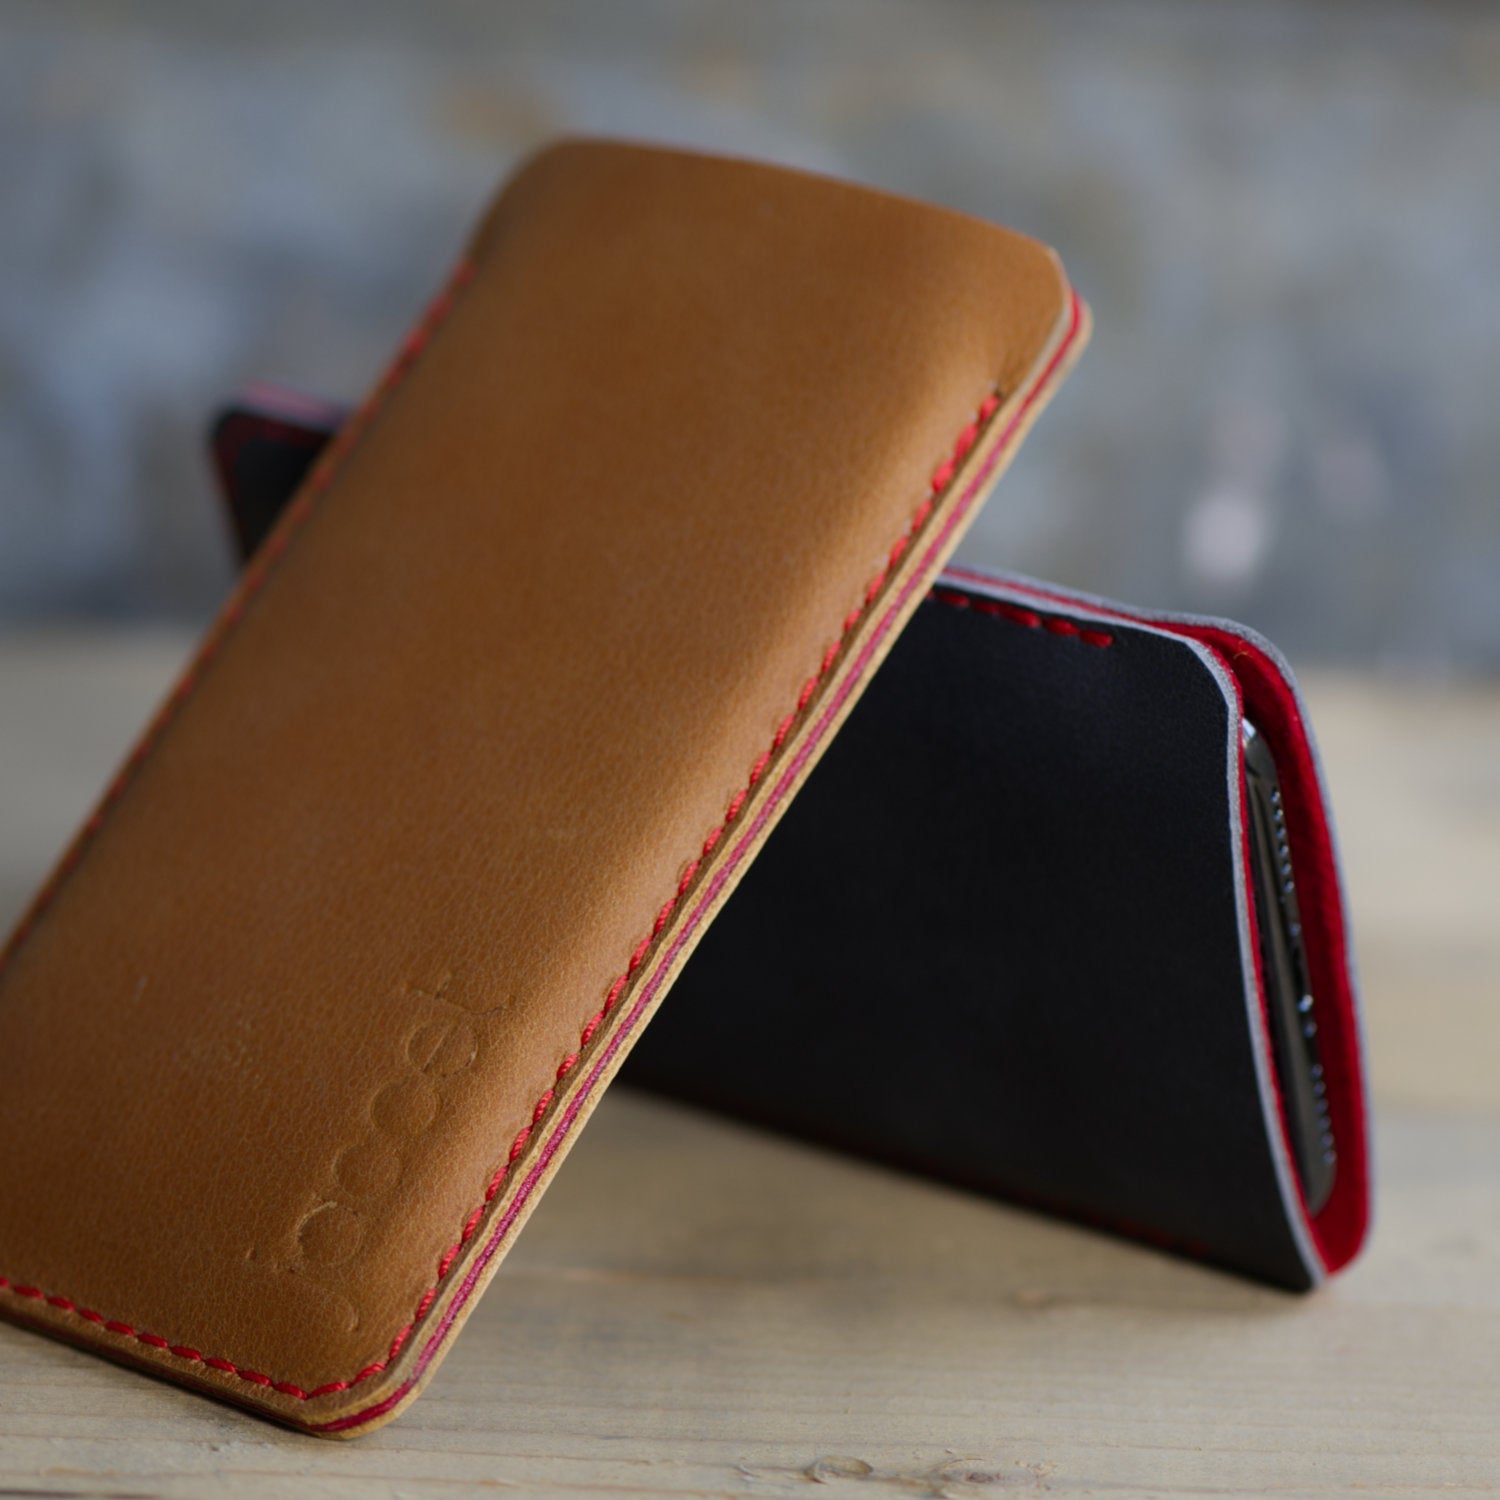 JACCET leather Sony Xperia sleeve - Cognac color leather with red wool felt - 100% Handmade